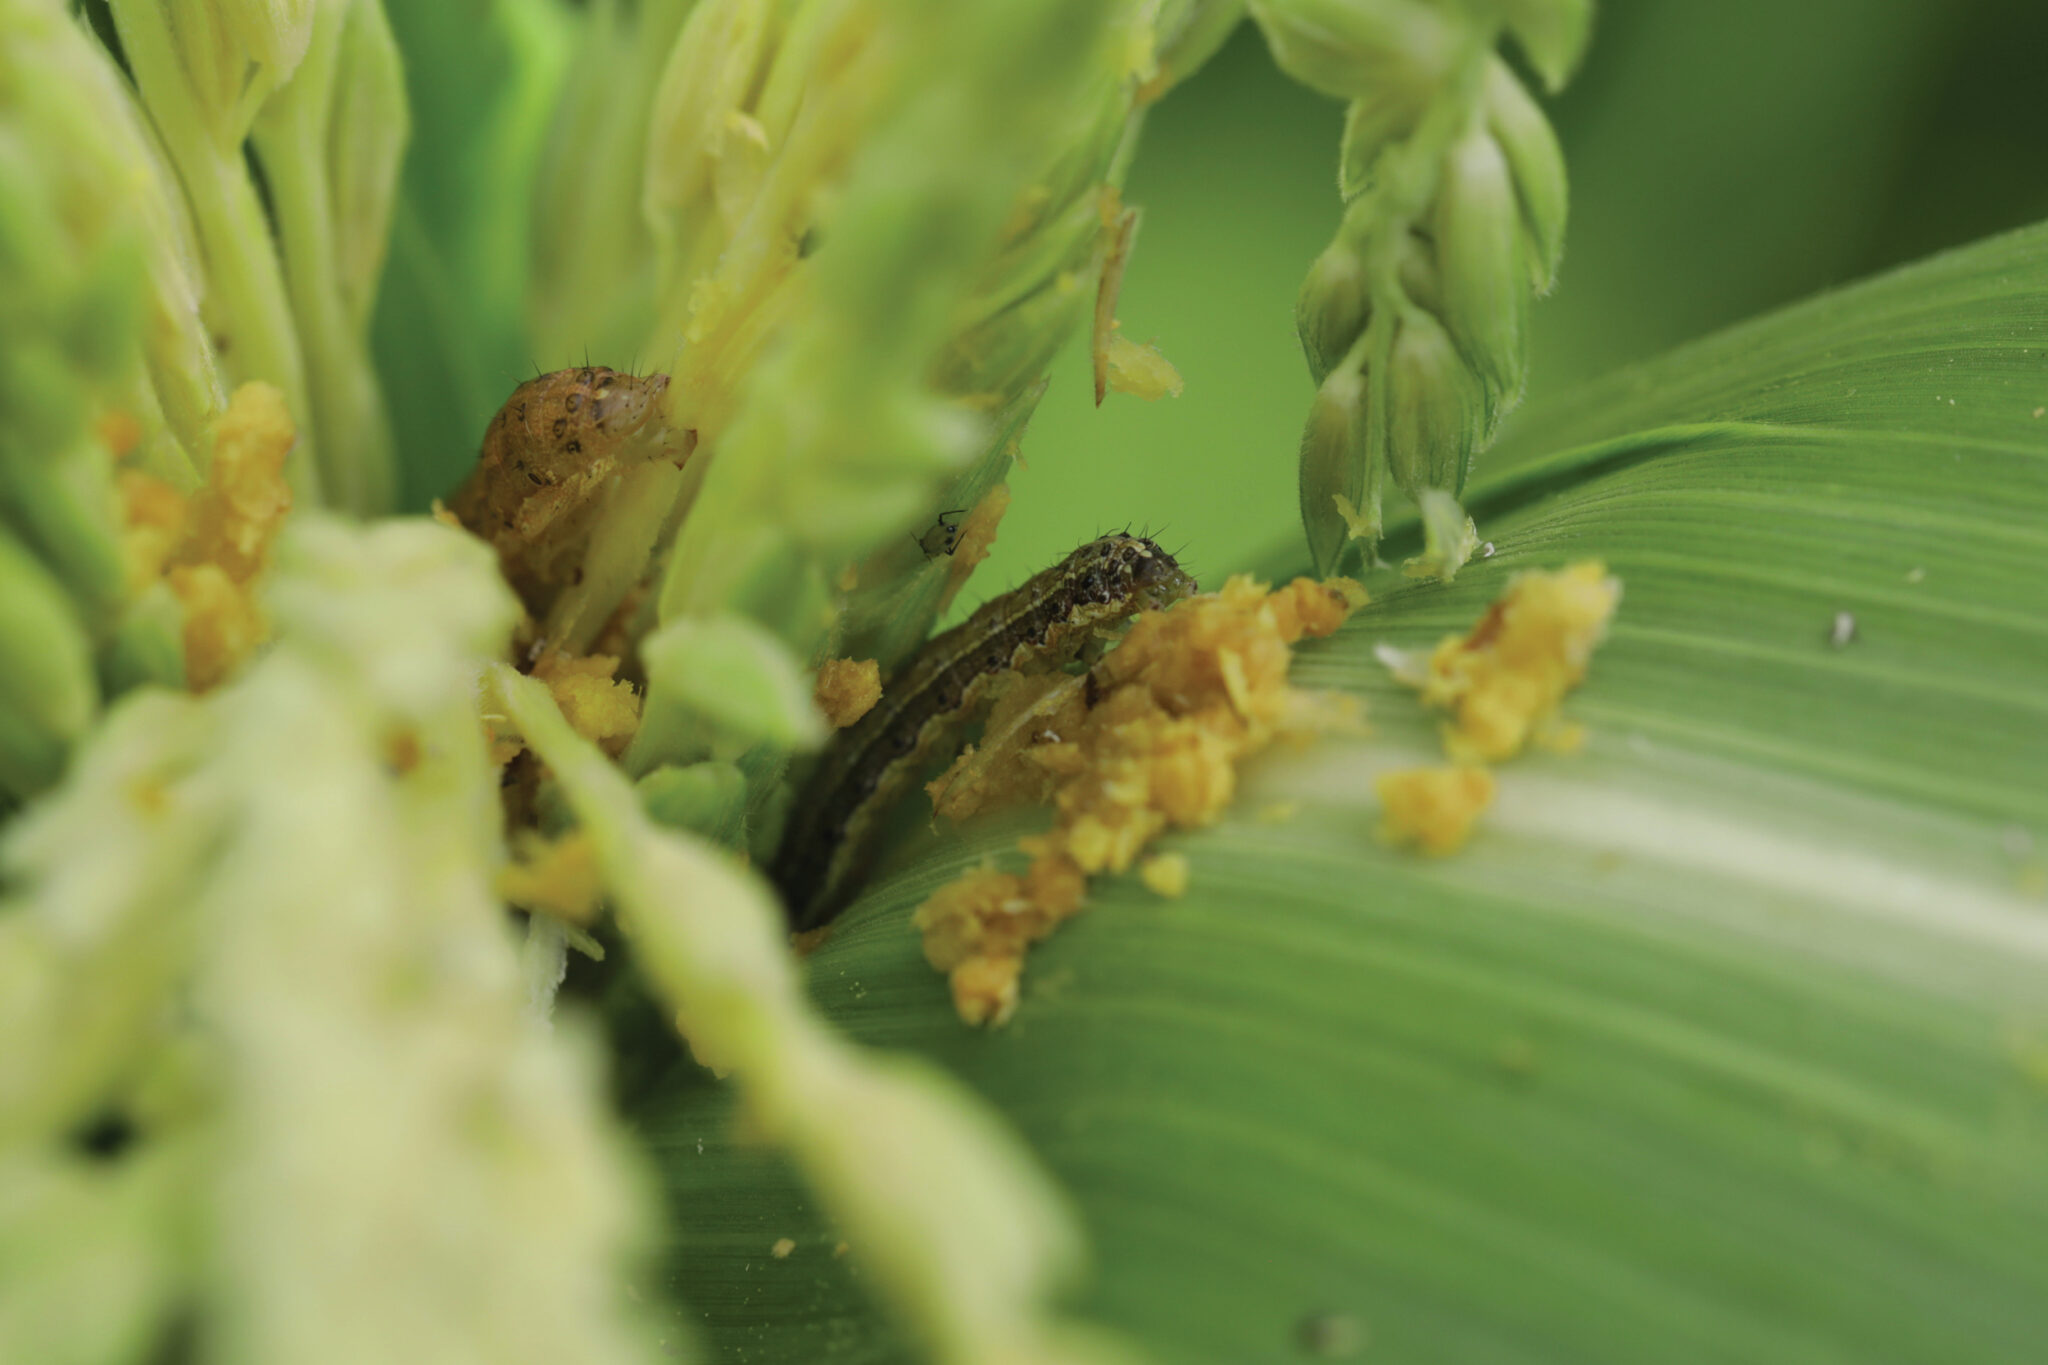 Fall armyworm identification and support